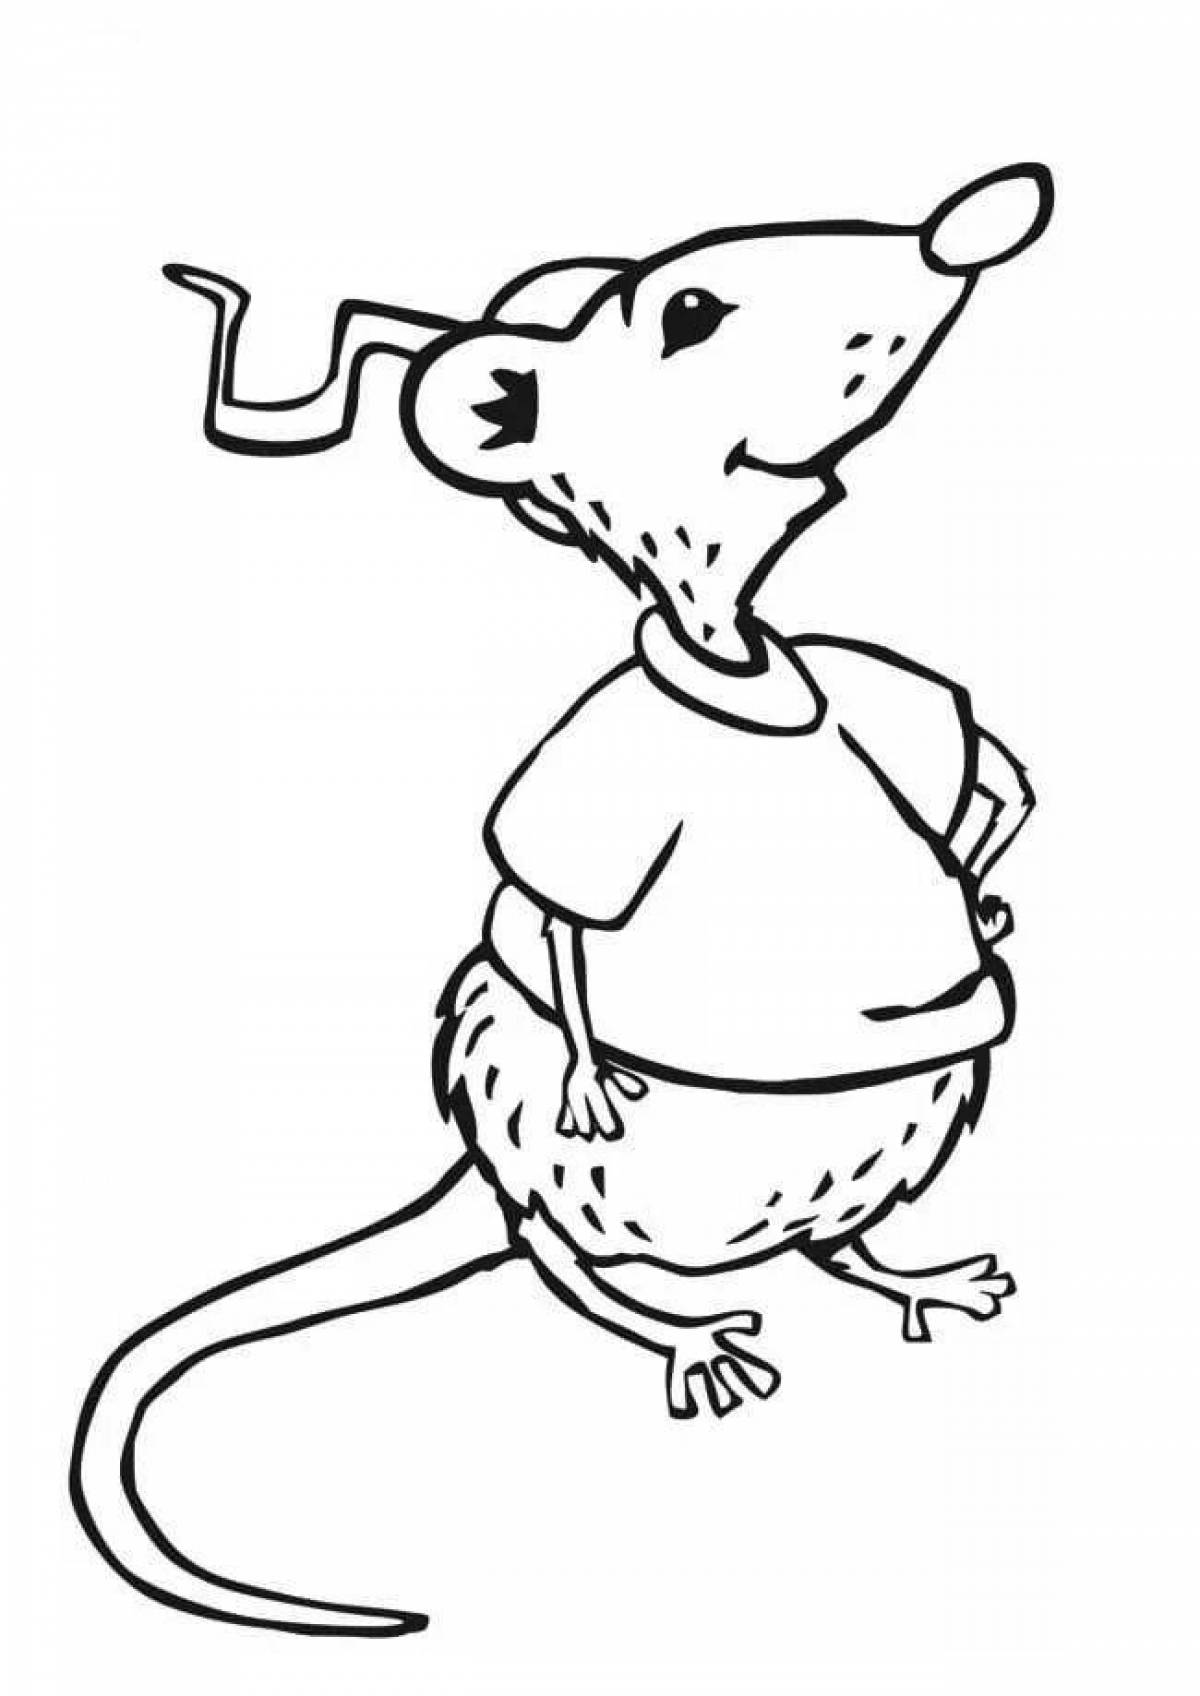 Colorful rat coloring book for kids